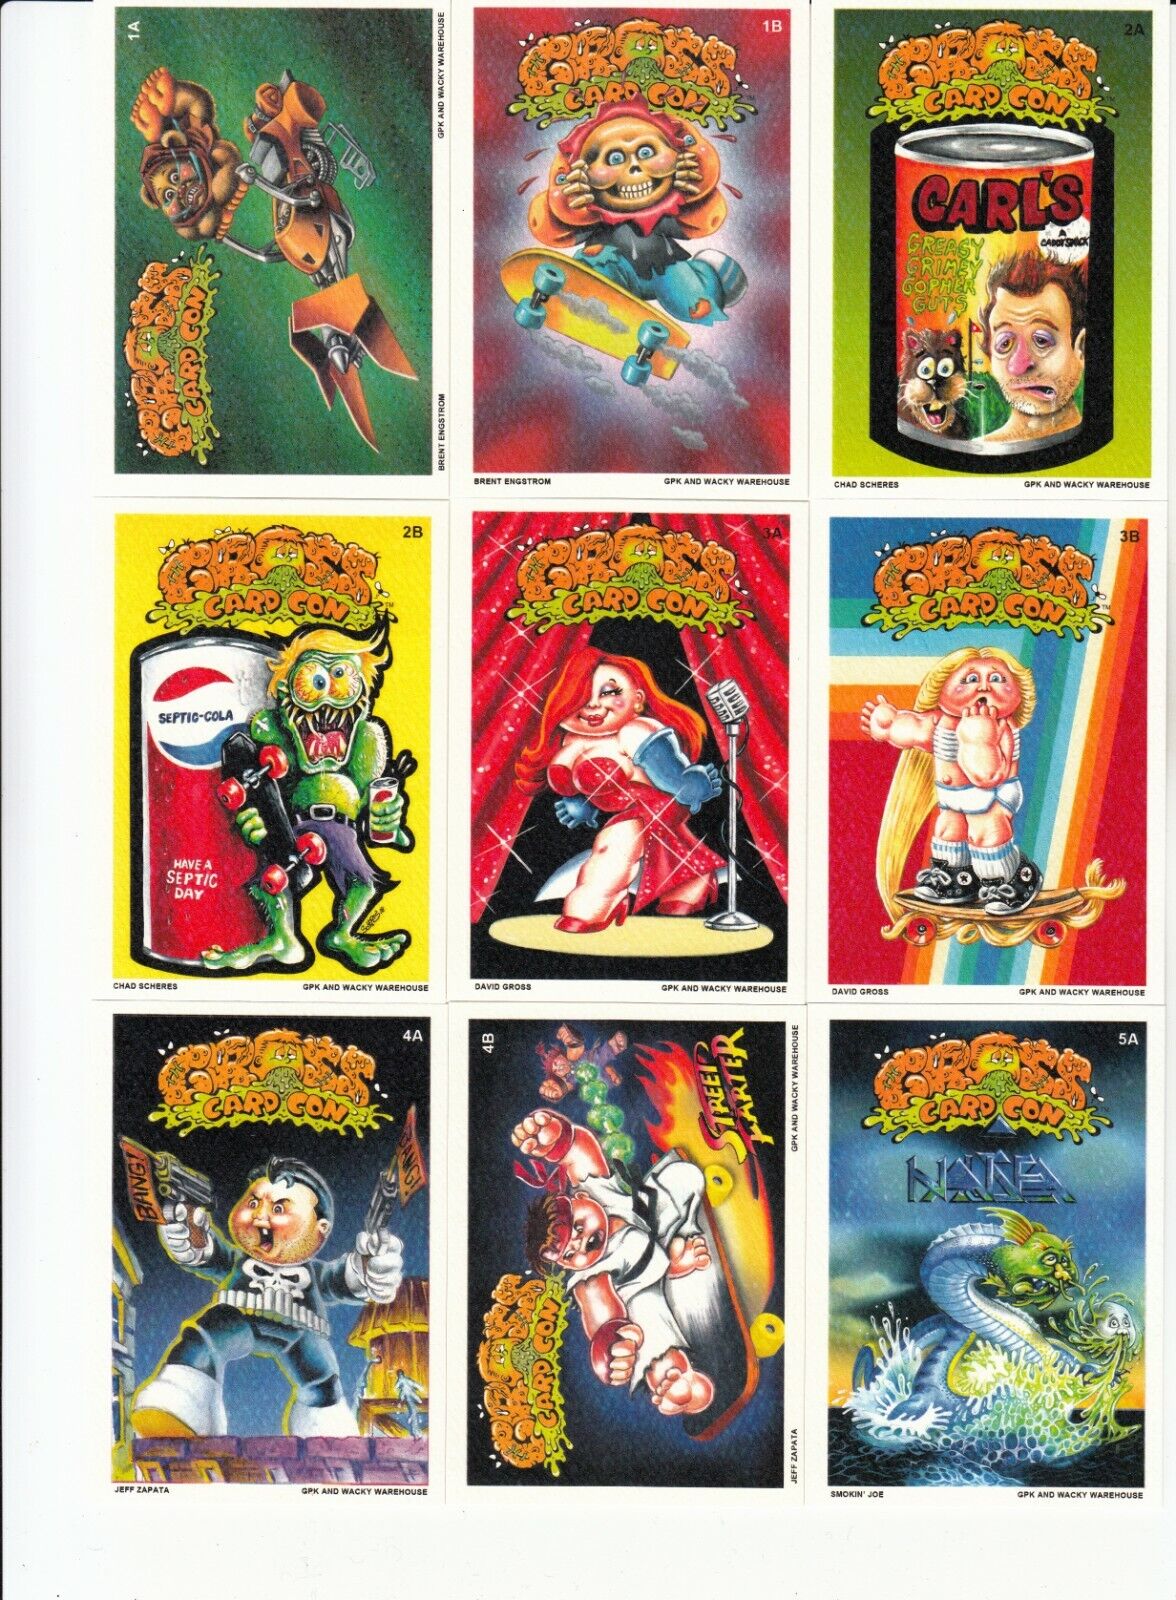 2018 GARBAGE PAIL KIDS GROSS CARD CON ARTIST CANVAS SET SEALED 18/18 CARDS